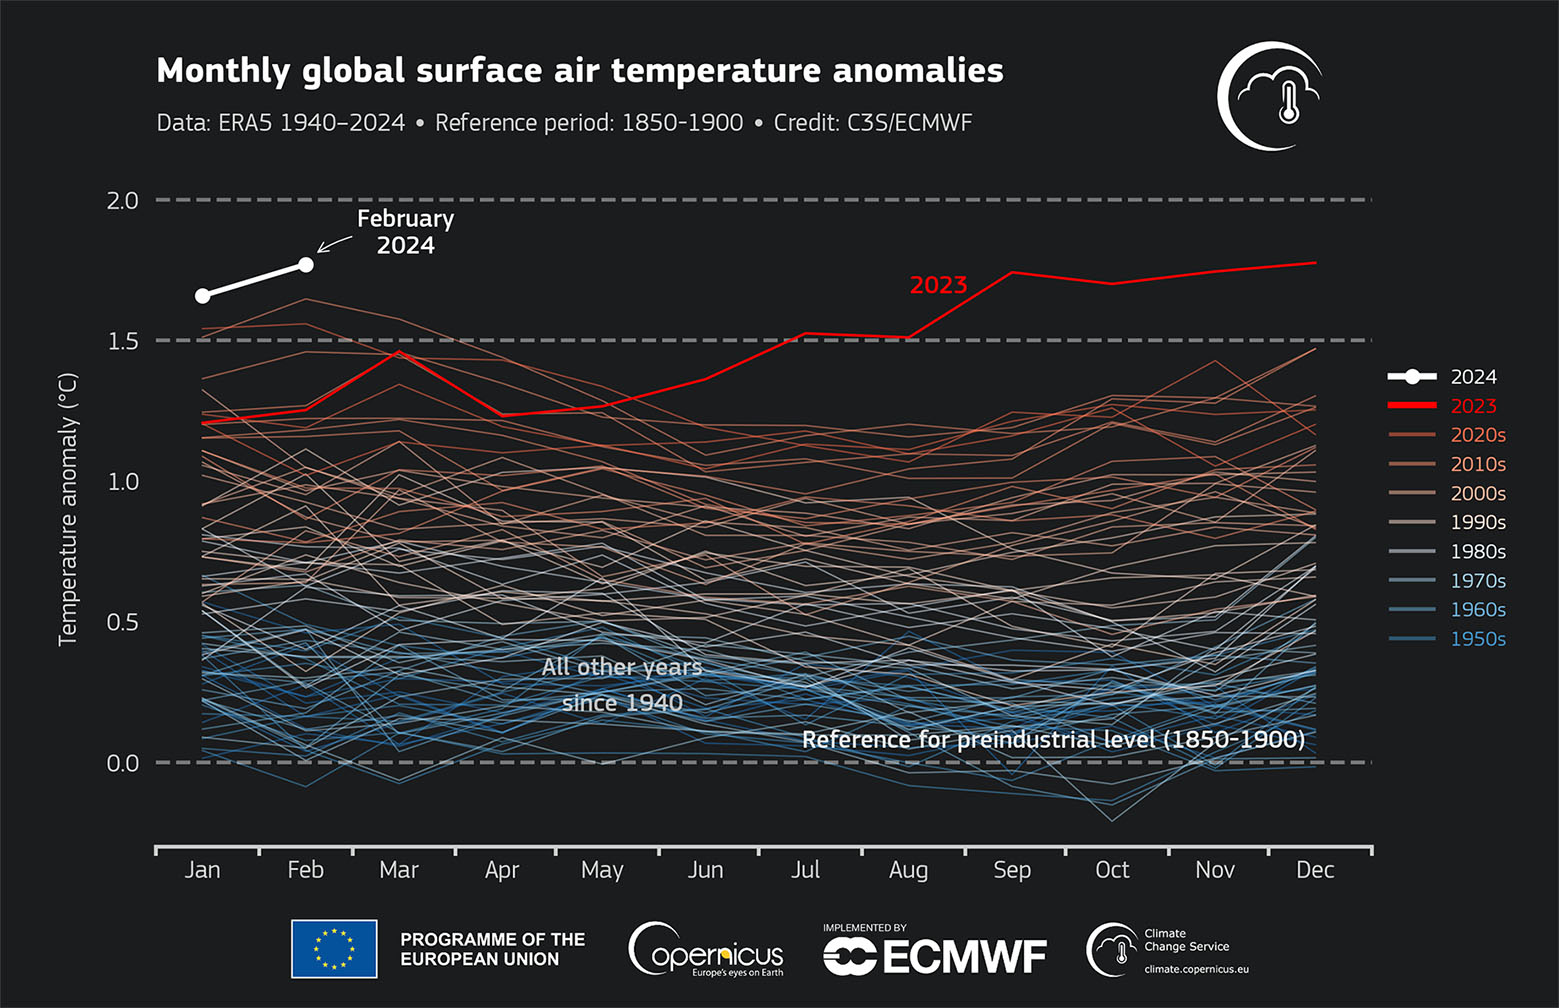 Monthly global surface air temperature anomalies (°C) relative to 1991–2020 from January 1940 to February 2024, plotted as time series for each year. 2024 is shown with a white line, 2023 with a red line, and all other years with thin lines shaded according to the decade, from blue (1940s) to brick red (2020s). Data source: ERA5. Credit: C3S/ECMWF.